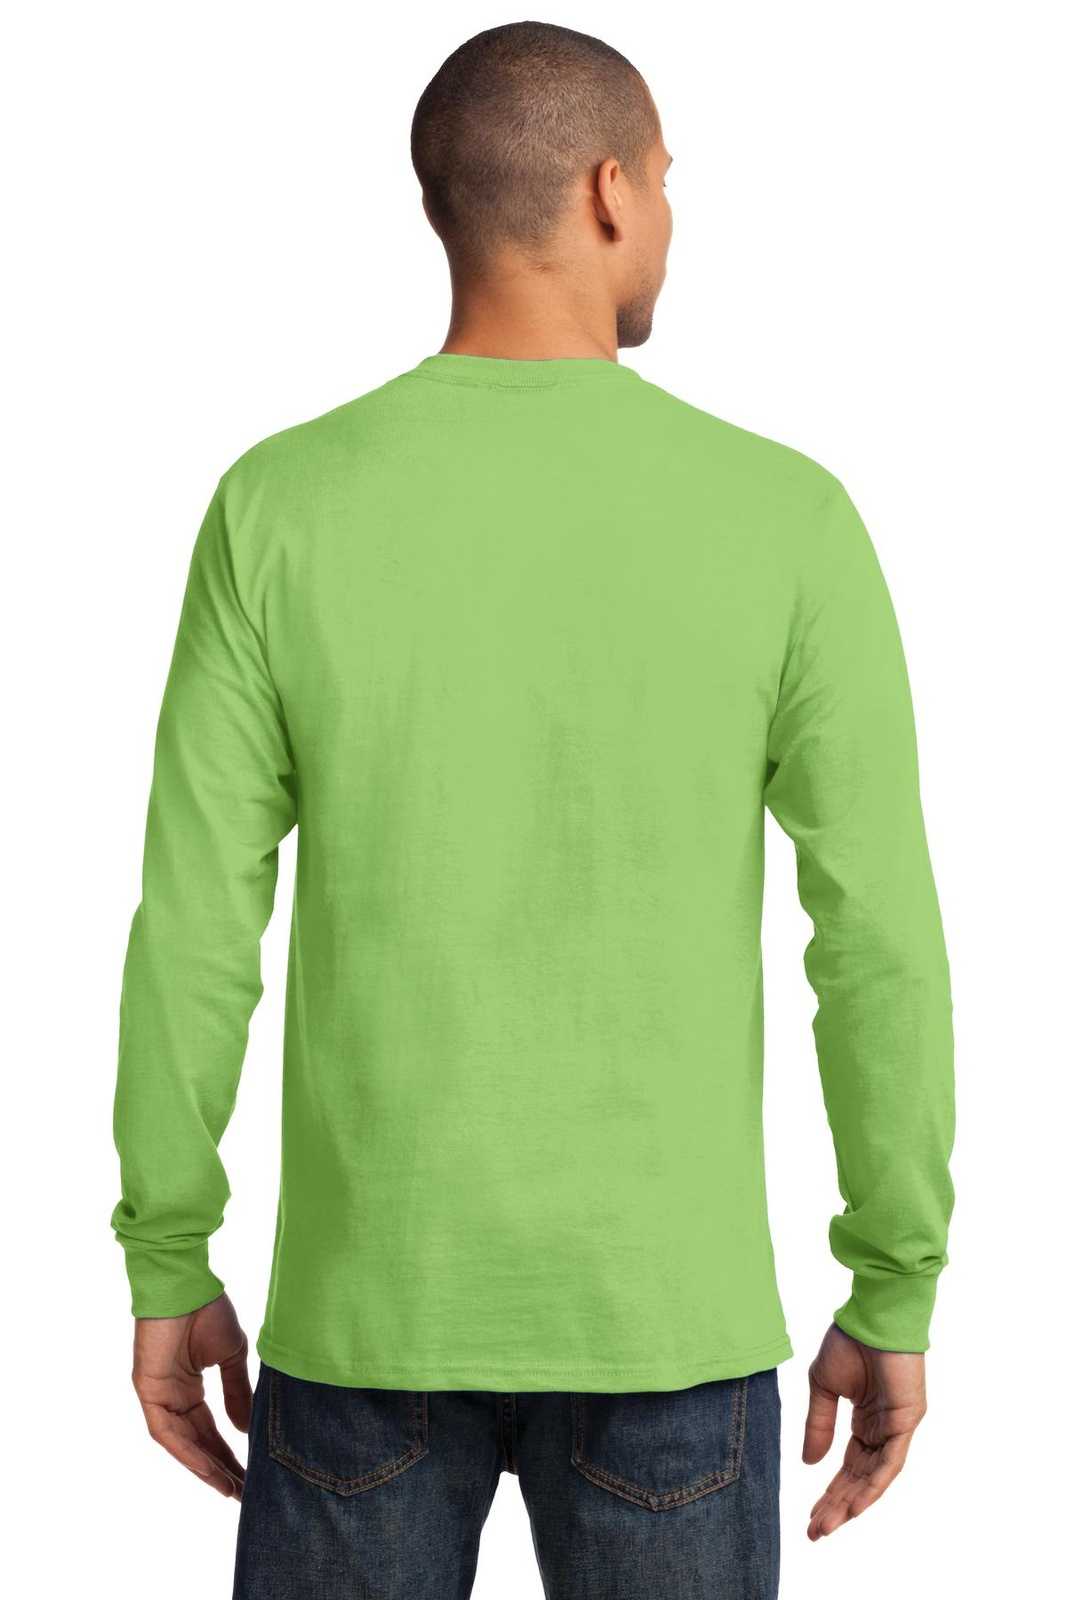 Port & Company PC61LS Long Sleeve Essential Tee - Lime - HIT a Double - 1